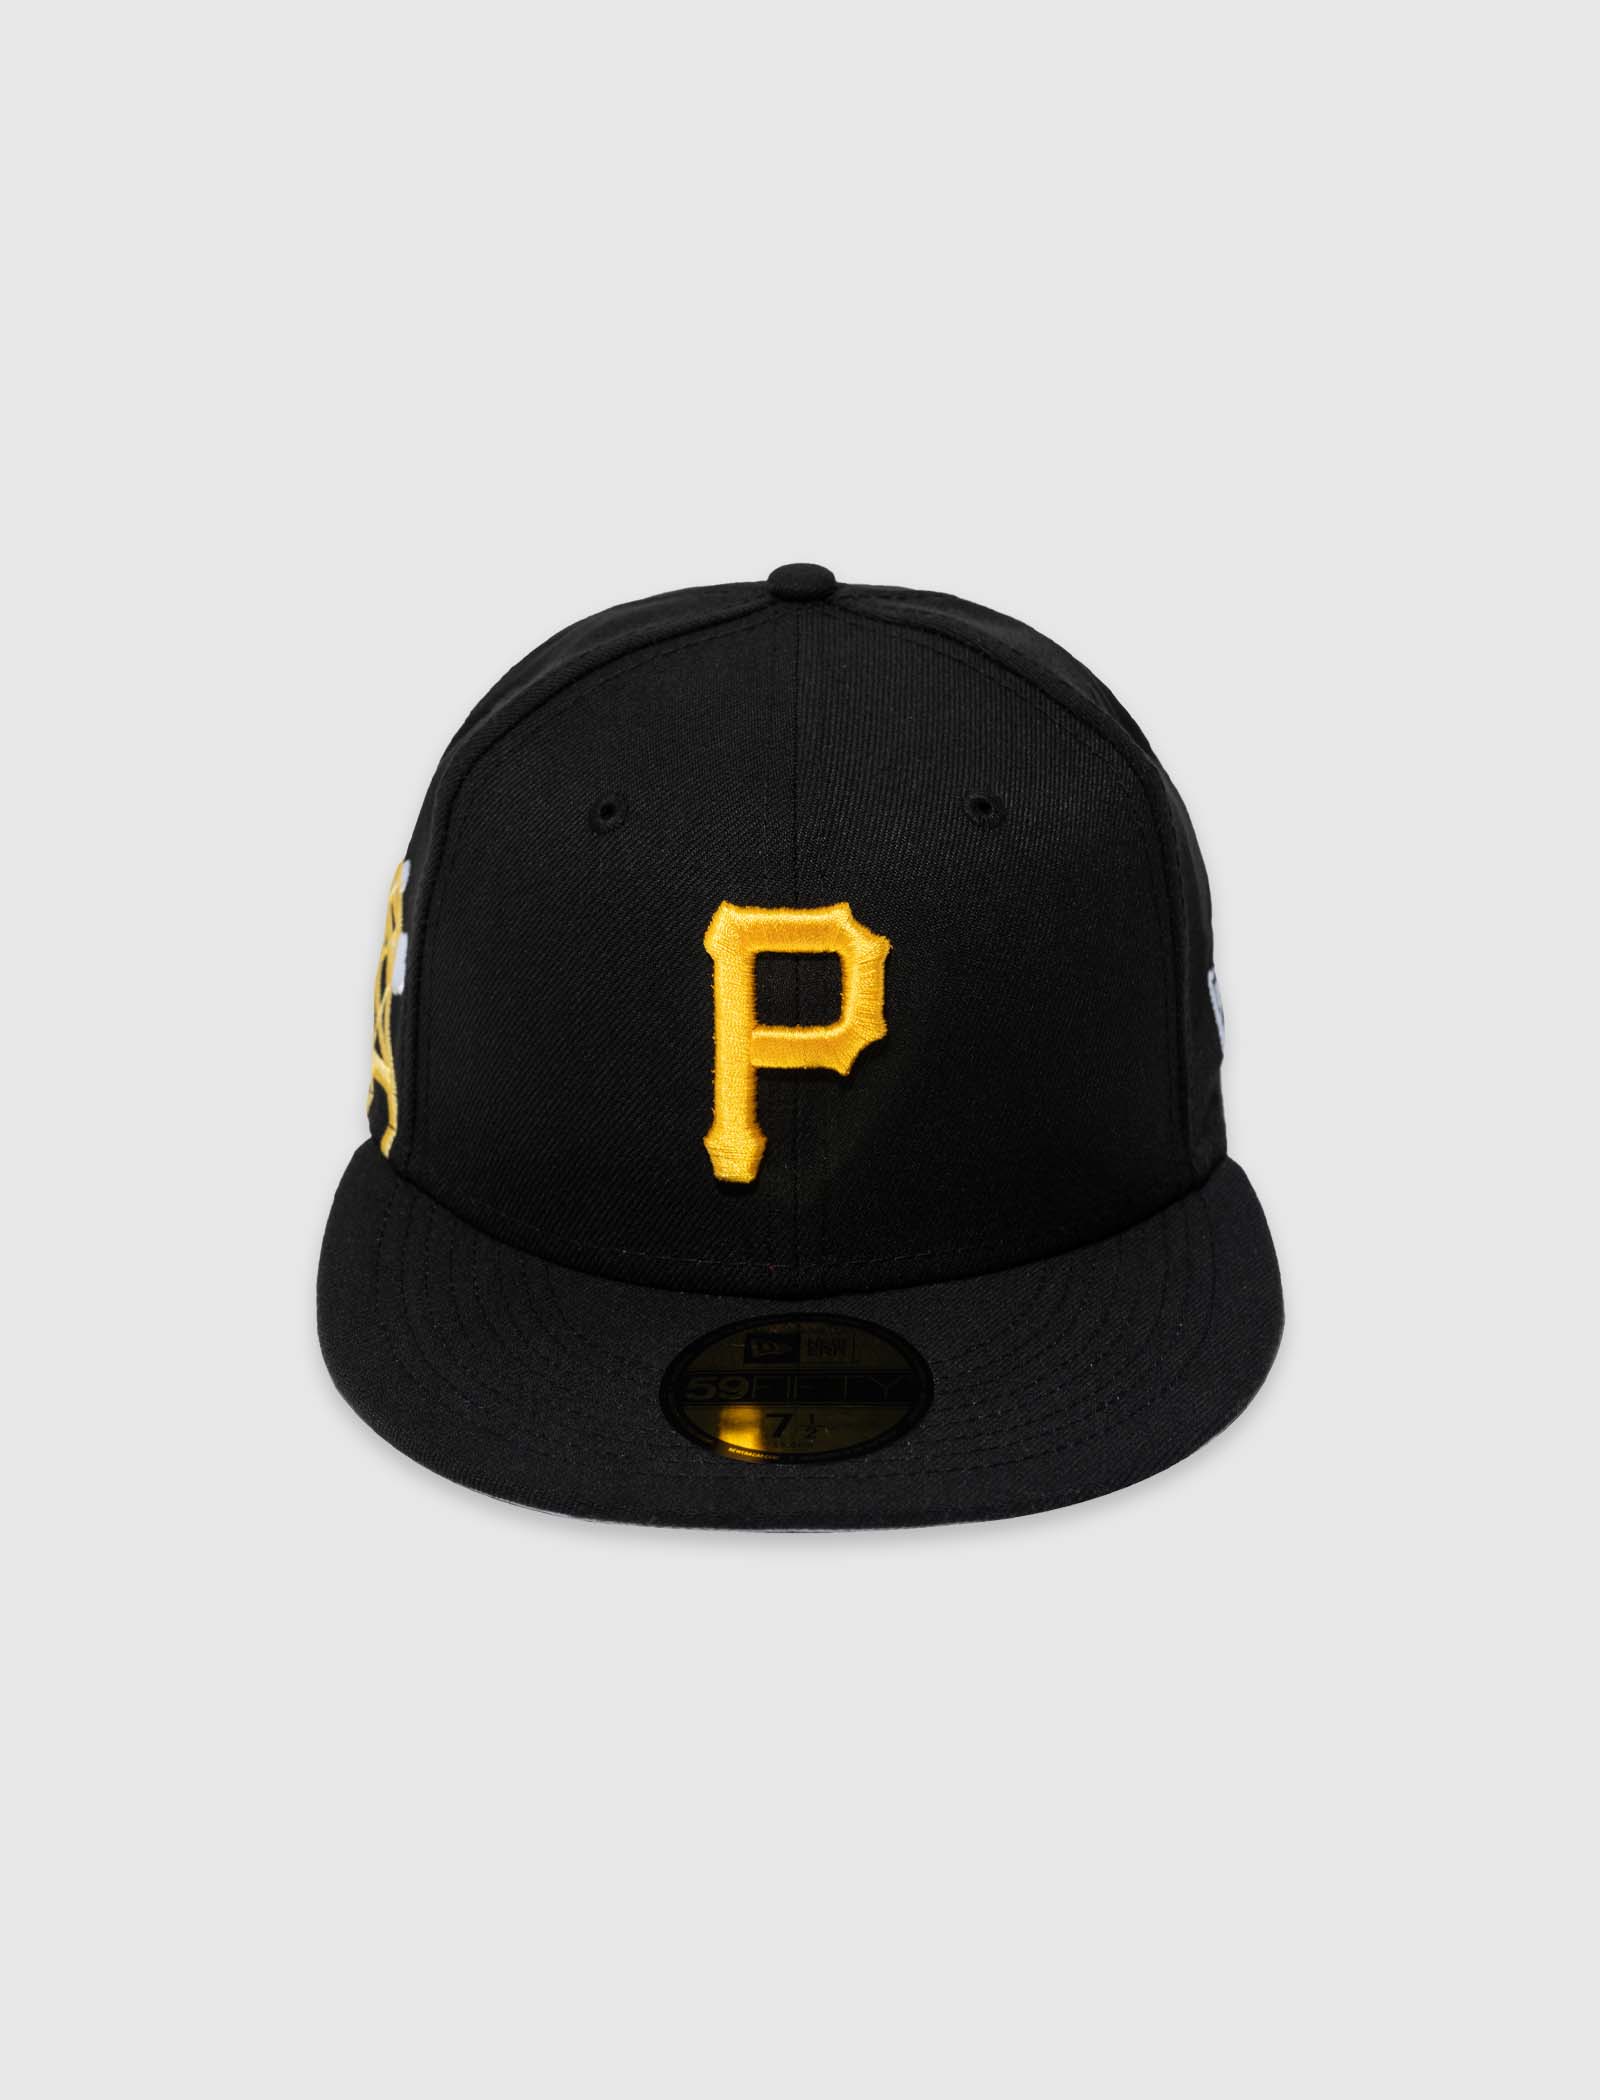 NEW ERA PITTSBURGH PIRATES CLOUD ICON 59FIFTY FITTED CAP